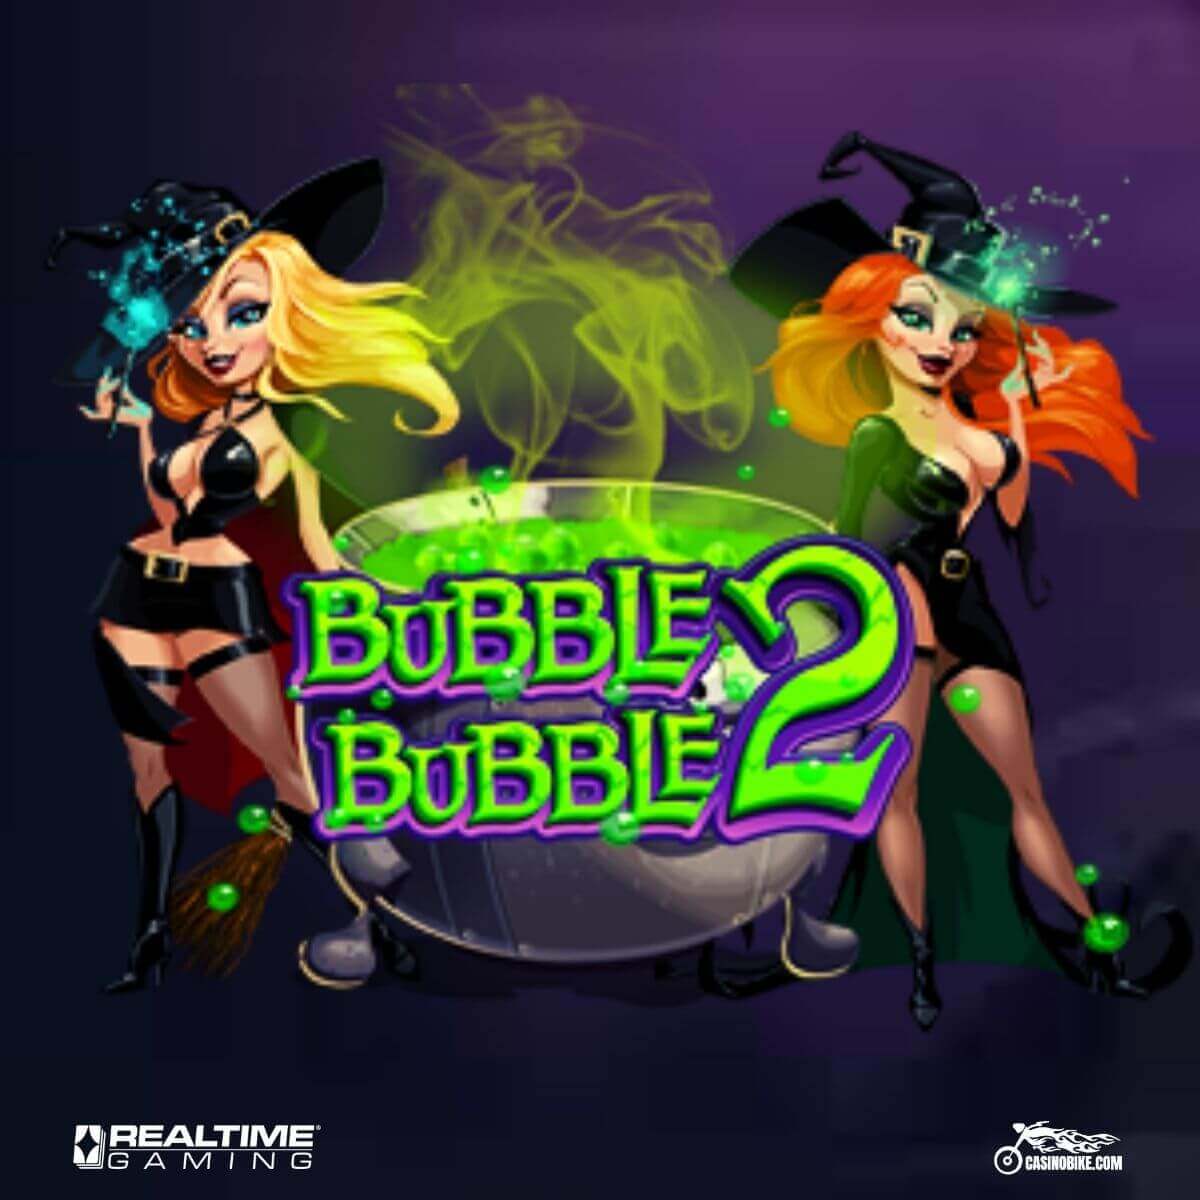 Bubble Bubble 2 Slot by Real Time Gaming